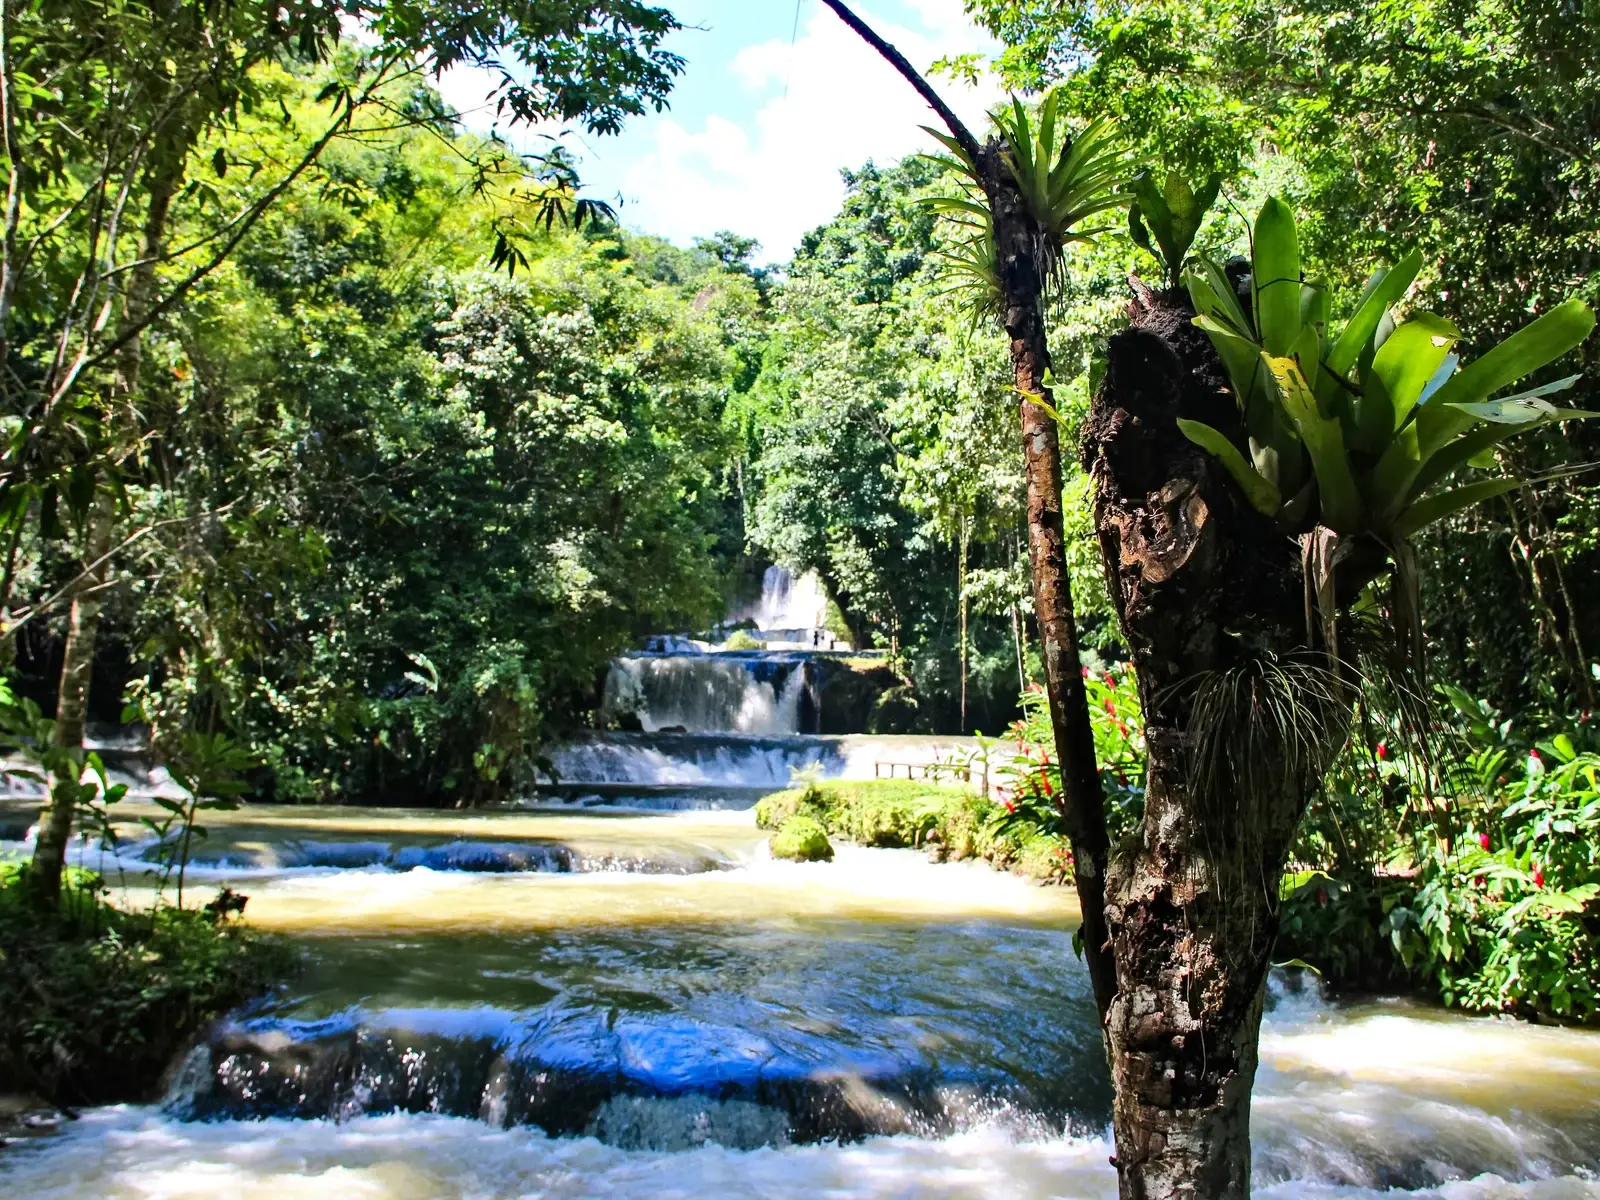 Saint Elizabeth Falls at Dunn River Falls, one of the best beaches in Jamaica